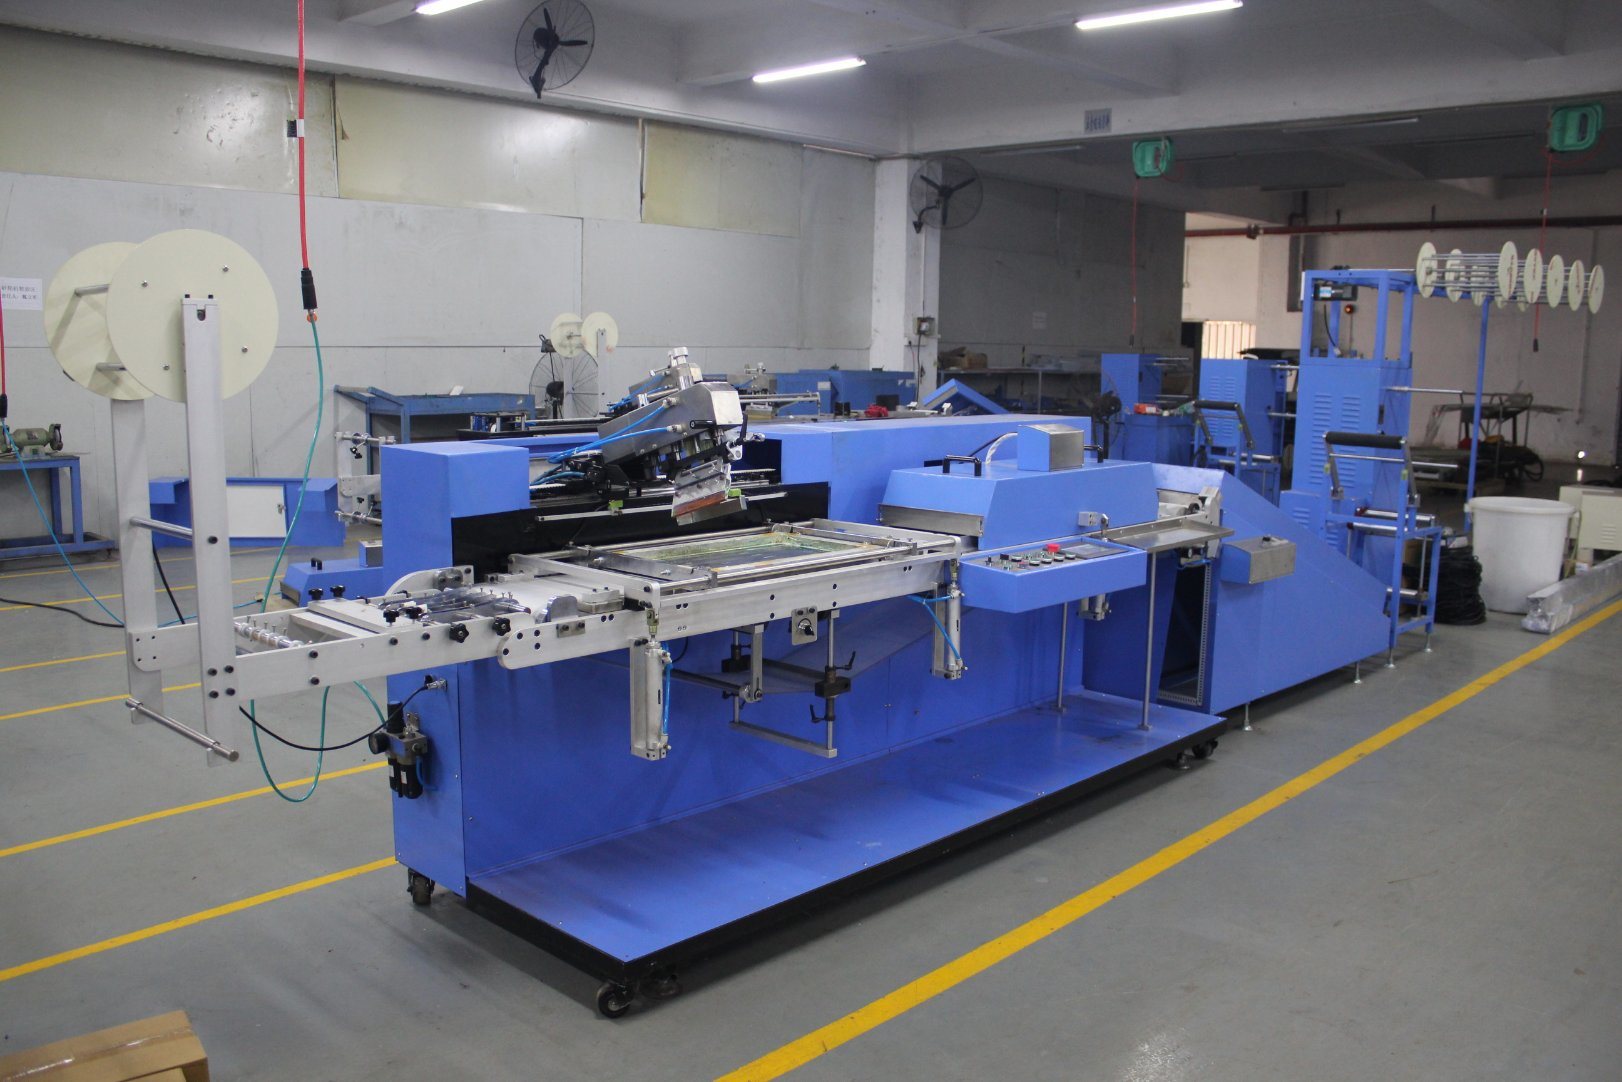 Single Color Elastic Tapes Screen Printing Machine Ds-301